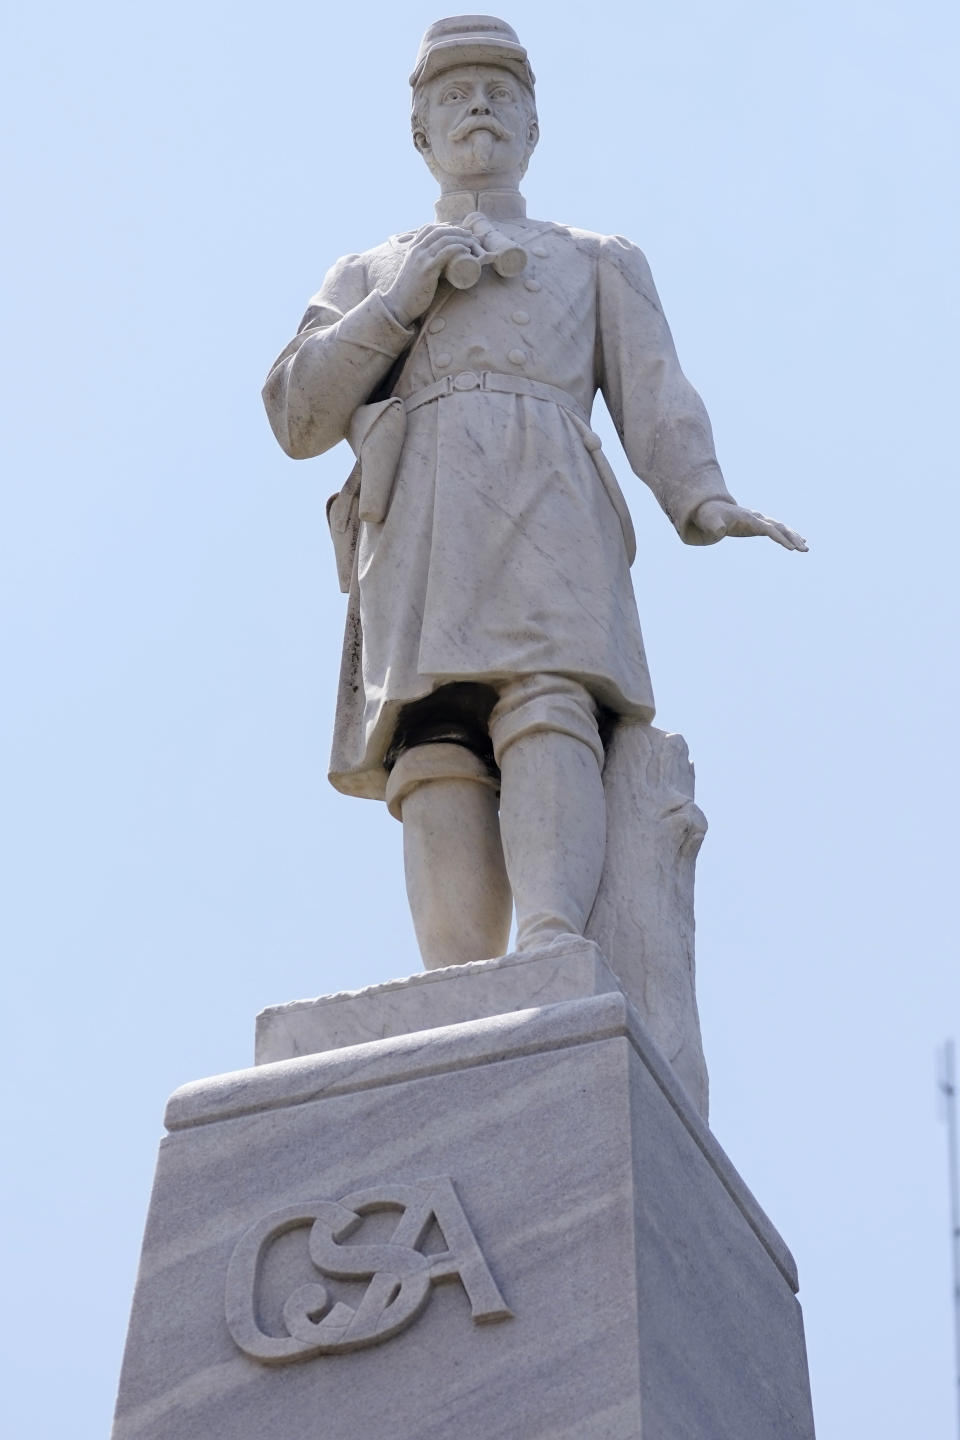 A figure of a Confederate officer, erected in 1913 in Greenwood, Miss., by the Varina Jefferson Davis Chapter of the United Daughters of the Confederacy, in Greenwood, Miss., sits on the lawn of the Leflore County Courthouse, July 14, 2021. For more than a century, one of Mississippi’s largest and most elaborate Confederate monuments has looked out over the lawn at the courthouse in the center of Greenwood. It's a Black-majority city with a rich civil rights history. Officials voted last year to remove the statue, but little progress has been made to that end. (AP Photo/Rogelio V. Solis)